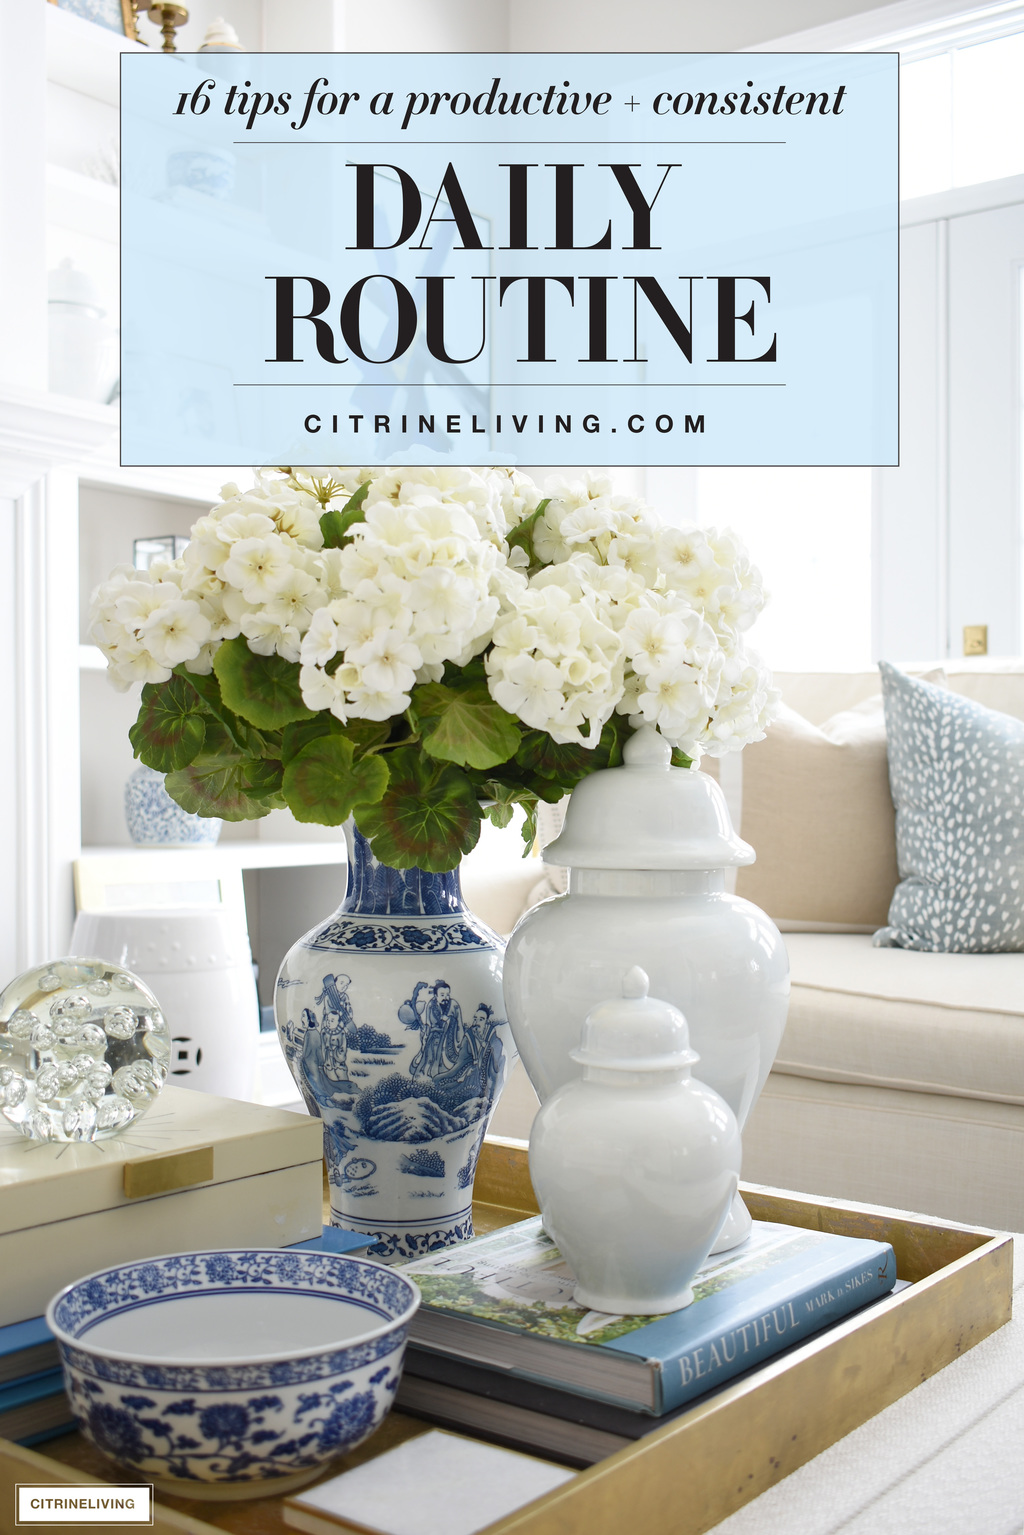 Beautiful blue and white vase with faux white floral arrangement paired with pale blue ginger jars.